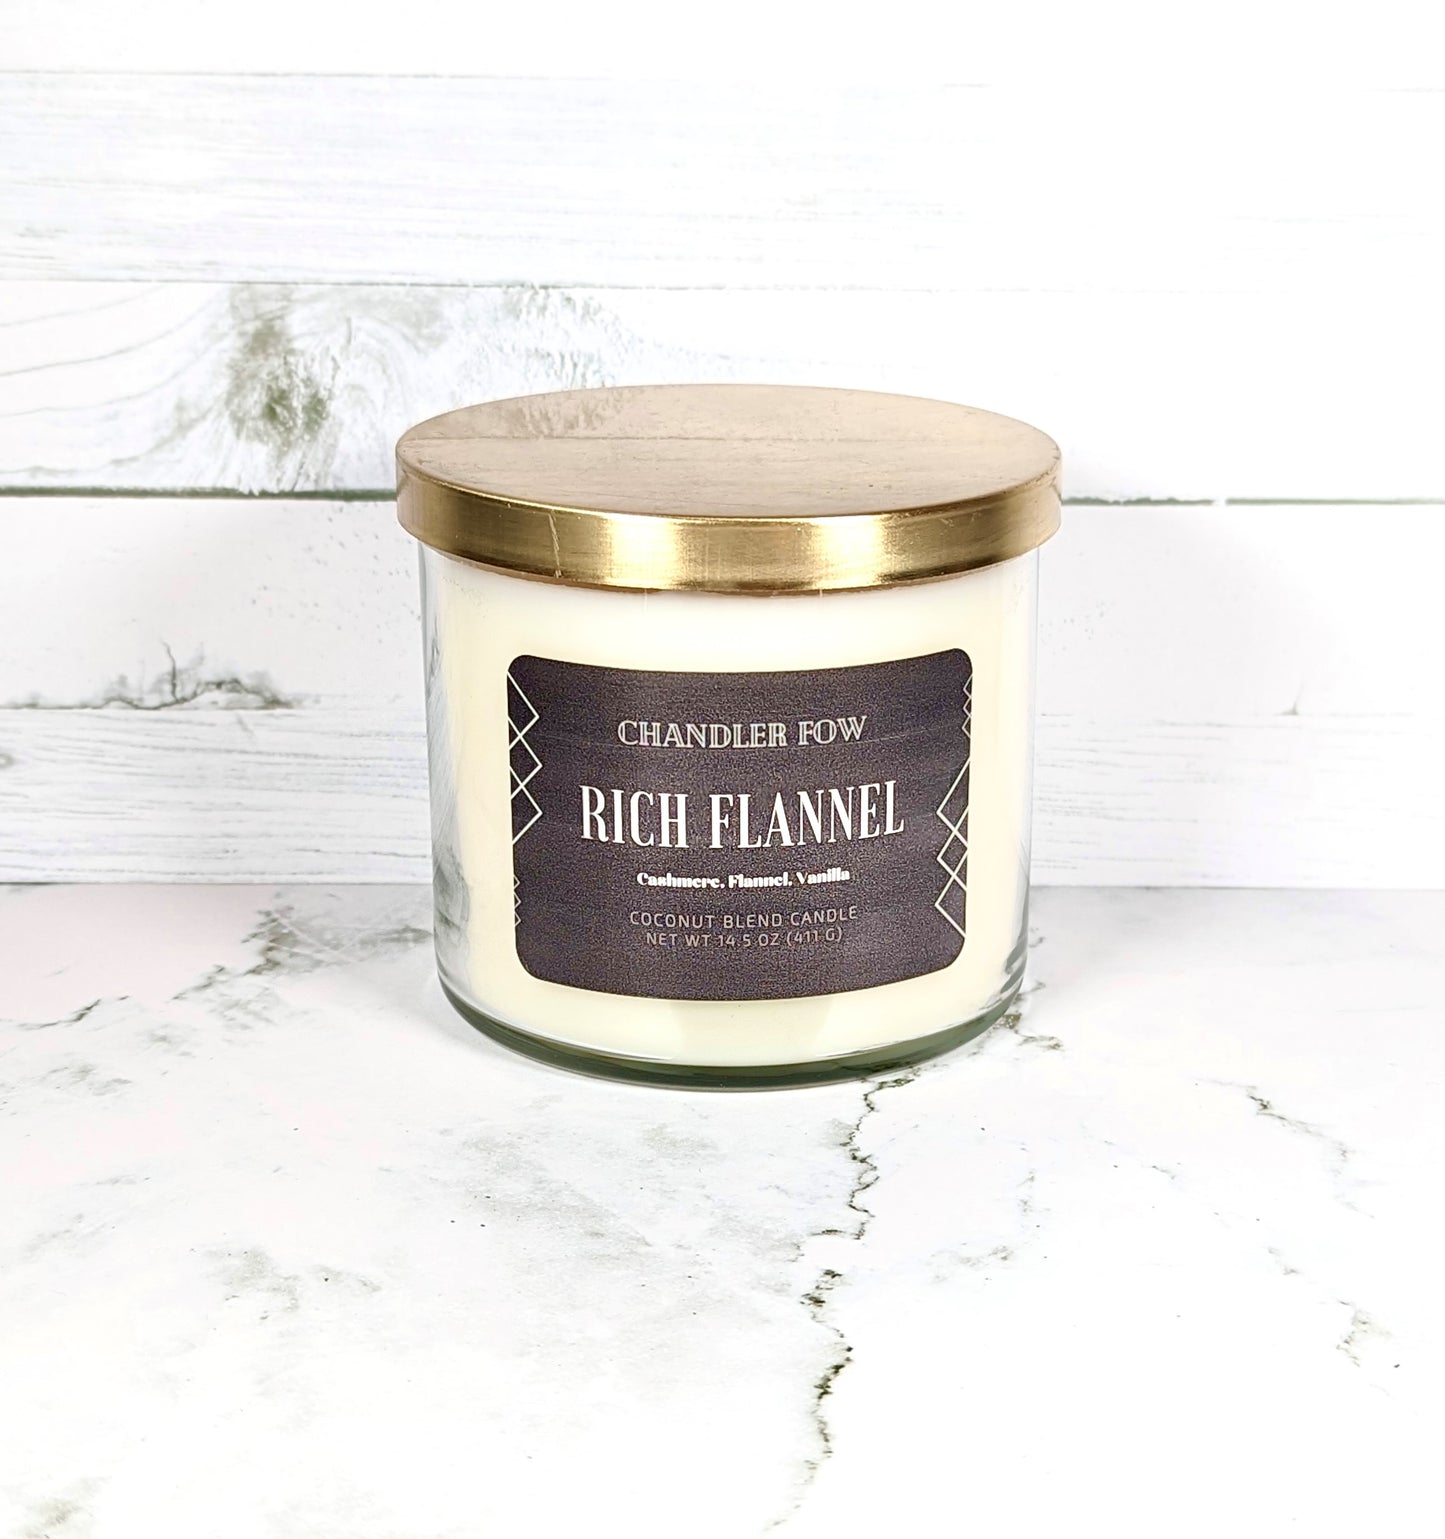 Rich Flannel 2-Wick Candle